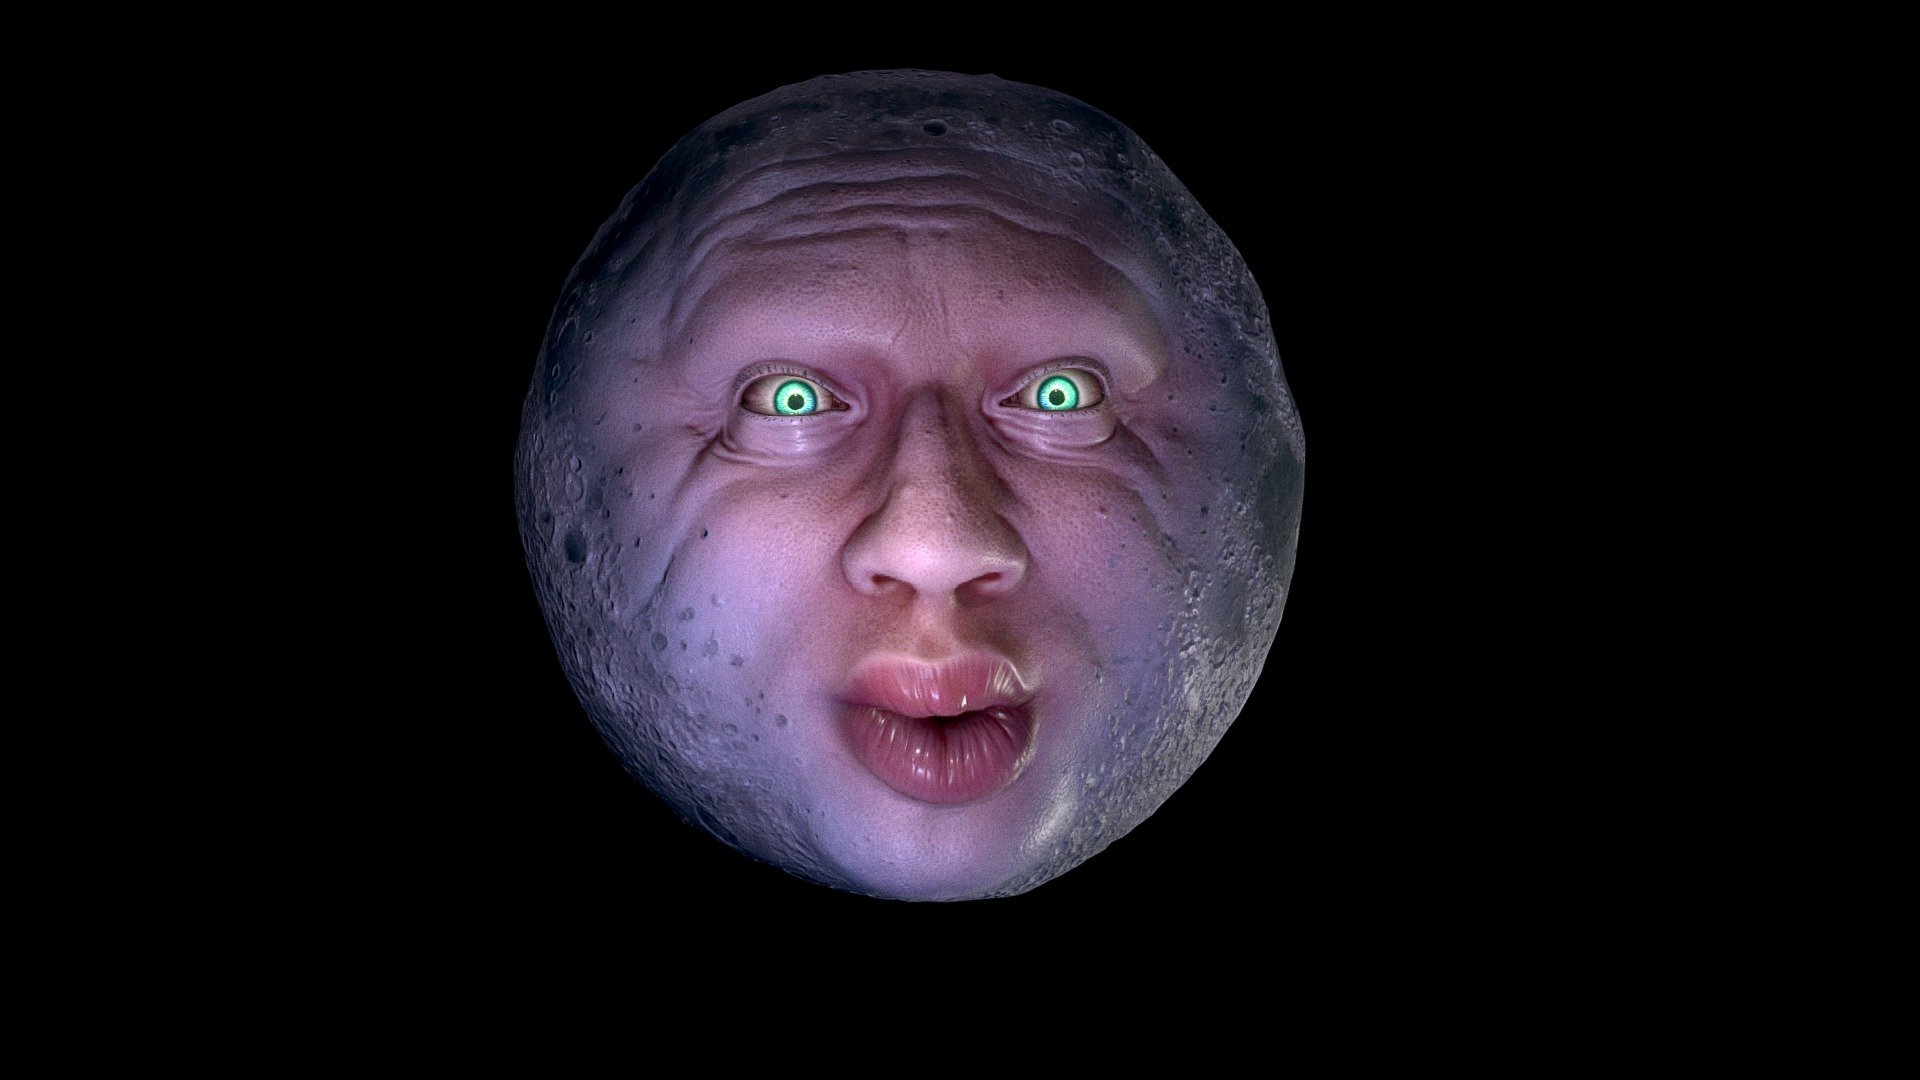 you always wanted to see that meme picture of Sam Hyde combined with the moon from Majoras Mask in real time 3D right?

well here it is anyway. 

don't ask why 3d model